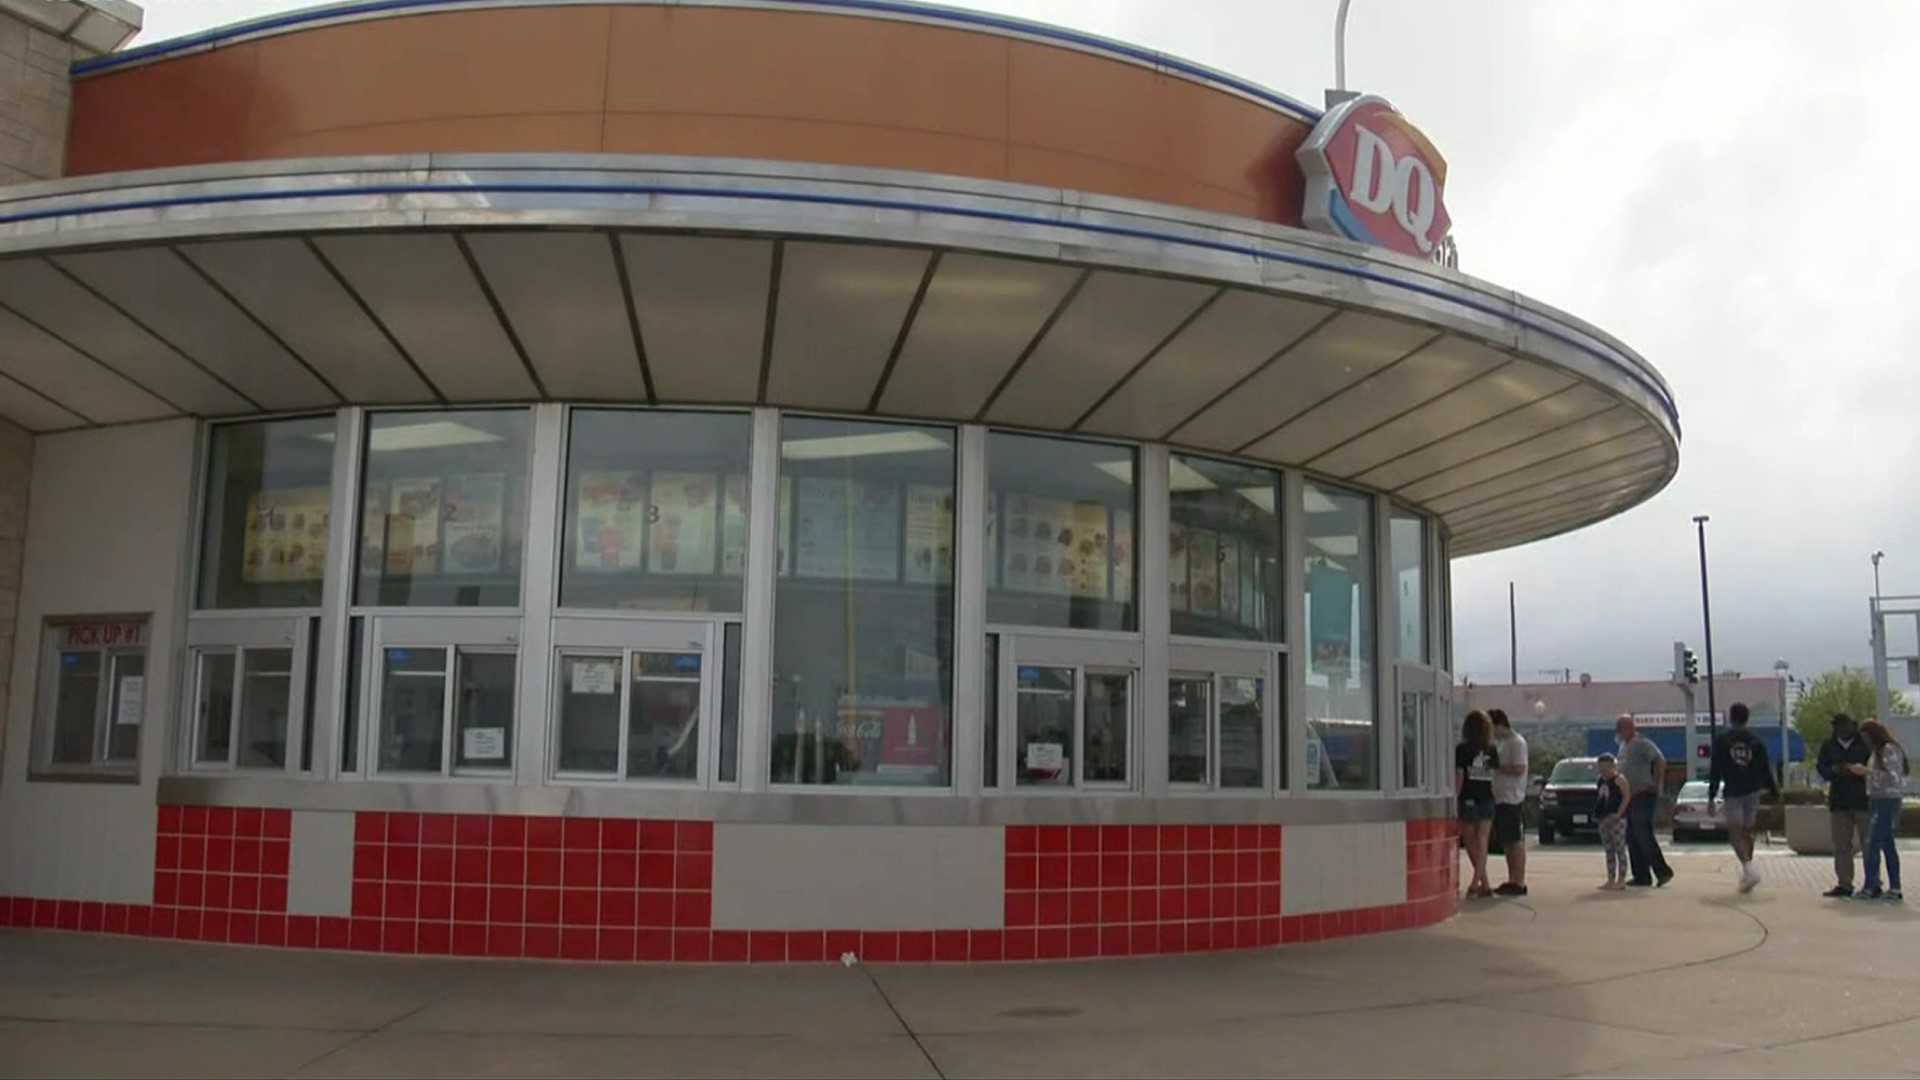 City officials confirmed that they now own the Dairy Queen located at 17th Street and Atlantic Avenue at a cost of $12.8 million.